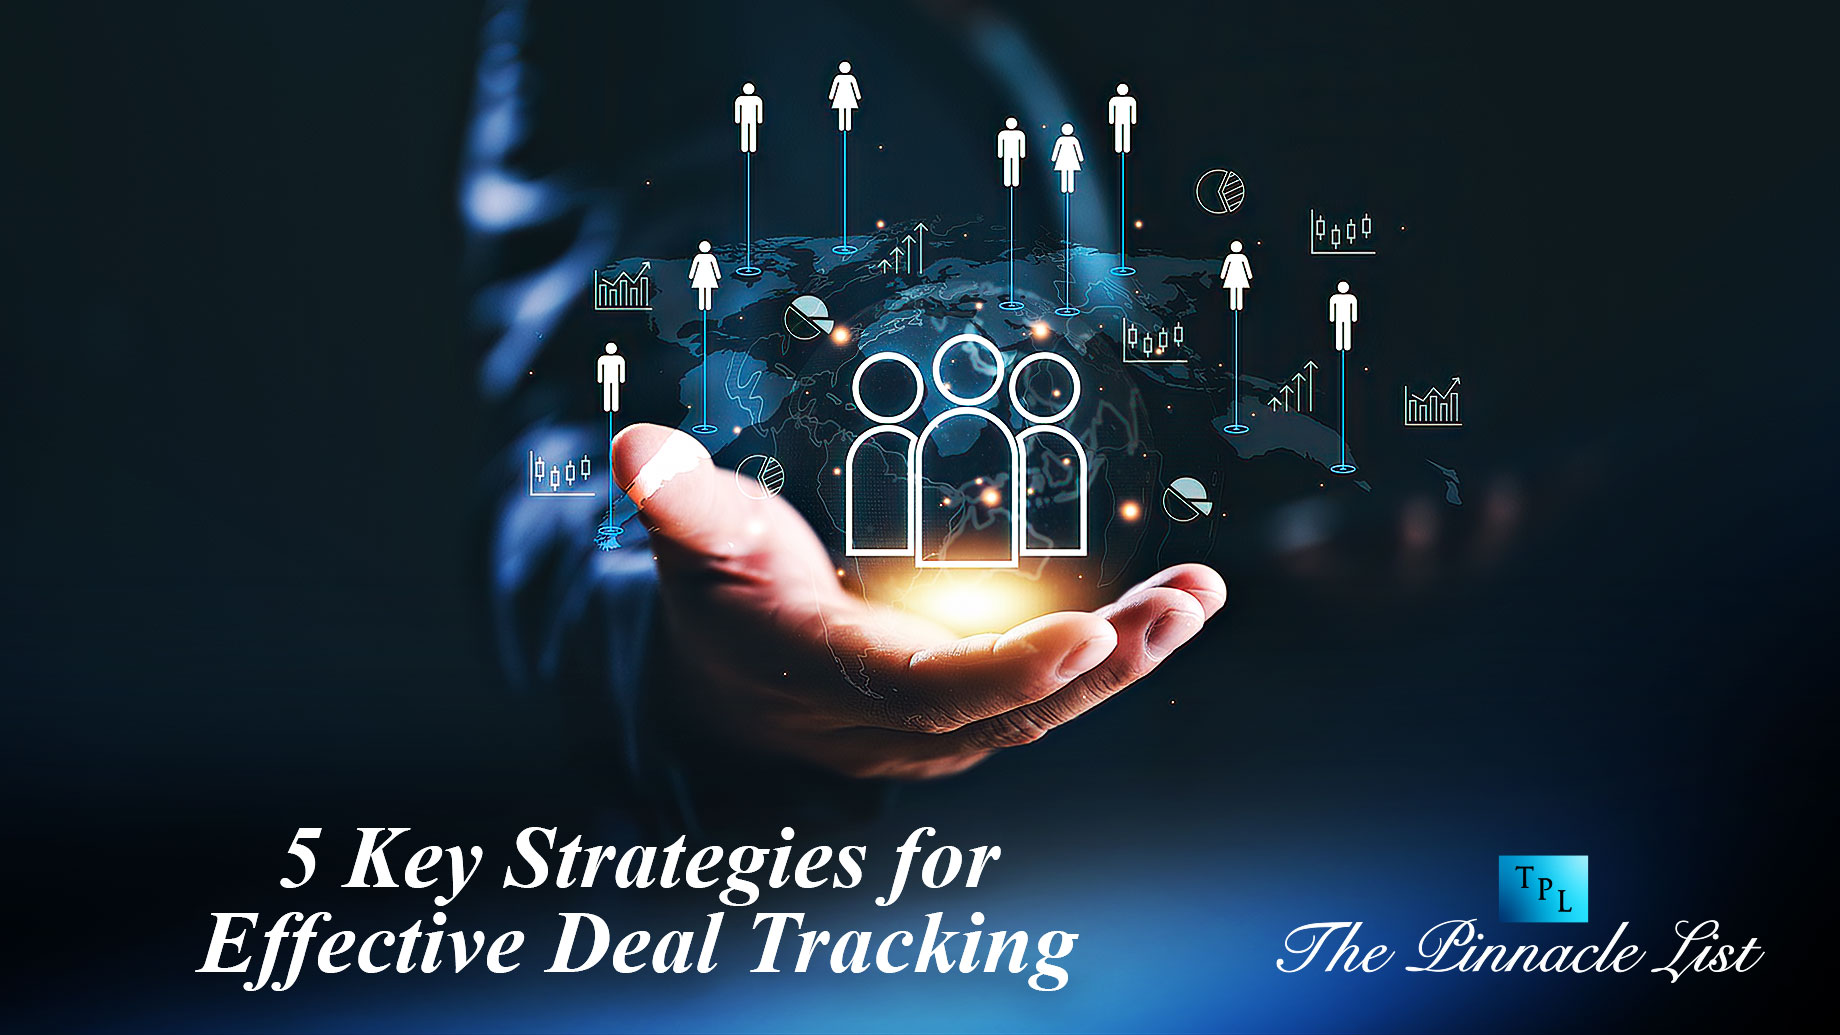 5 Key Strategies for Effective Deal Tracking